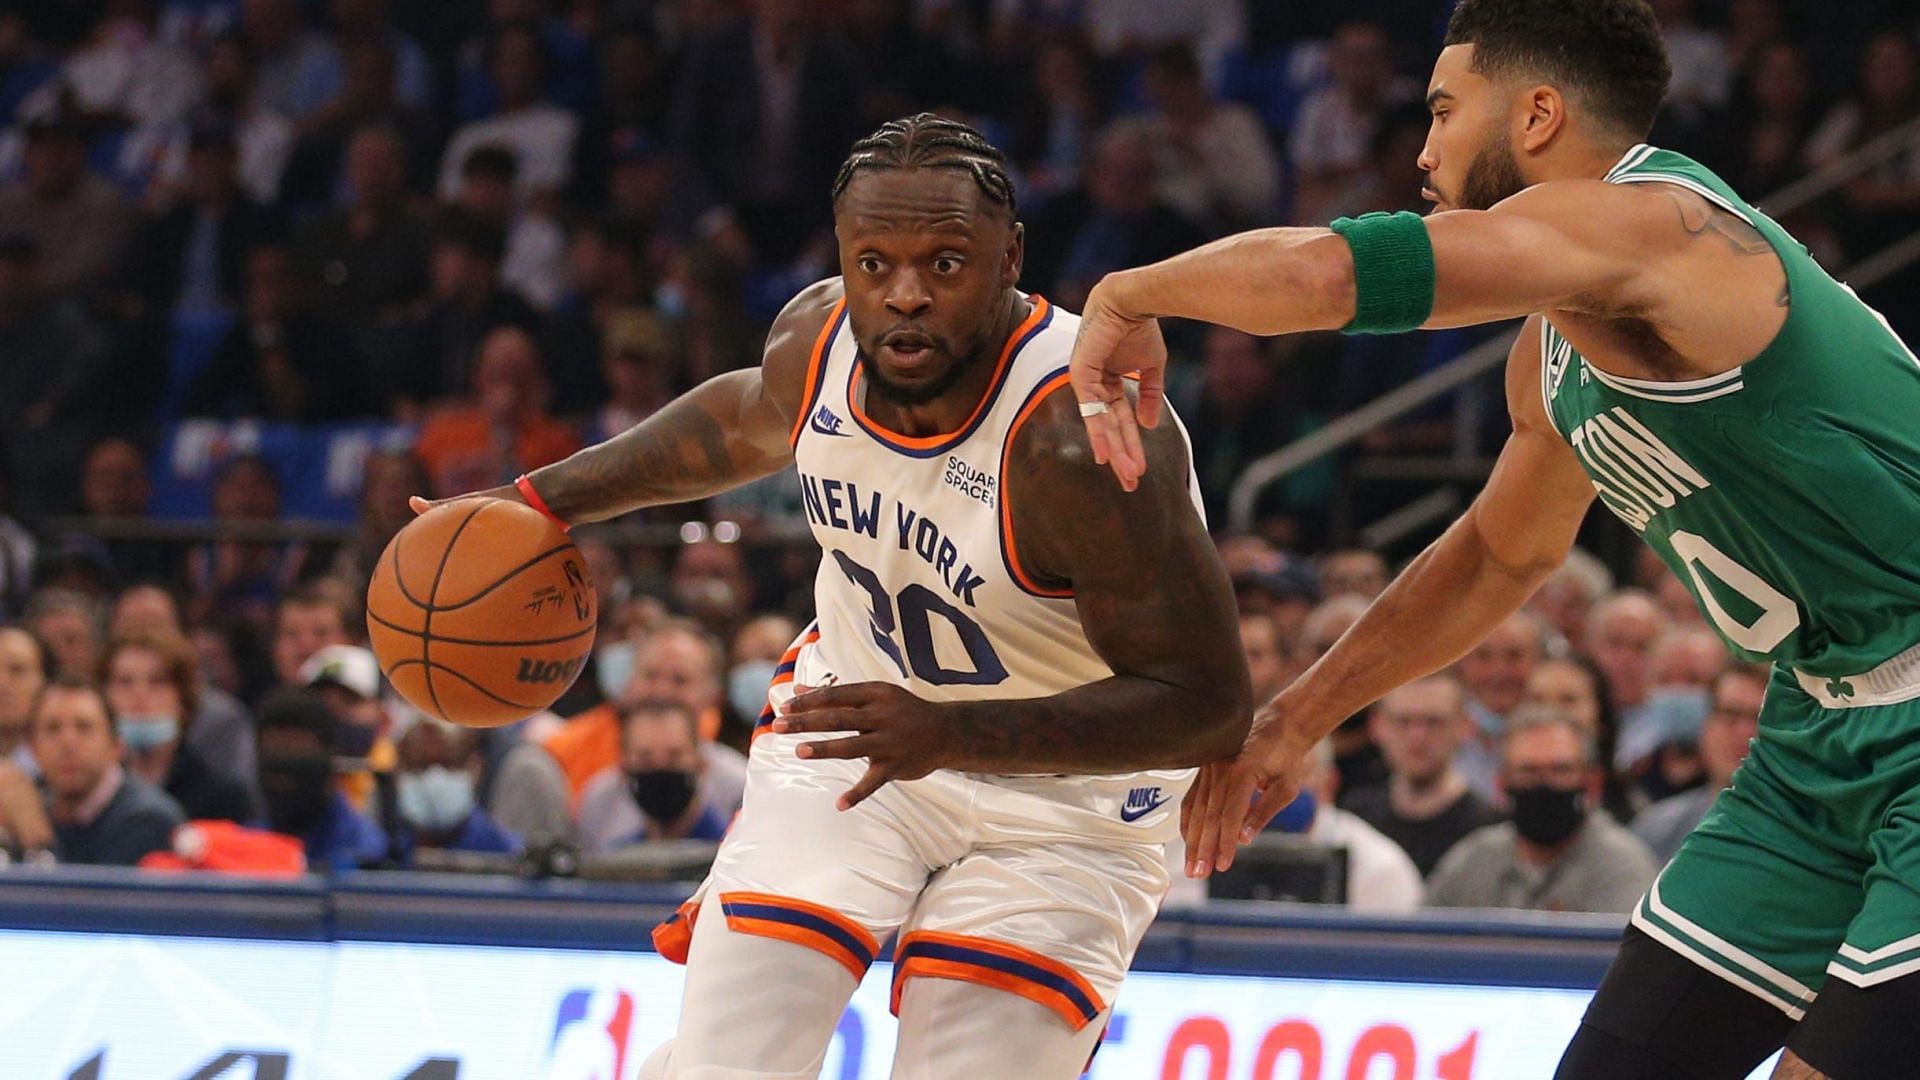 The New York Knicks and the Boston Celtics will square off for the first time since their classic two-overtime season debut thriller. [Photo: USA Today]